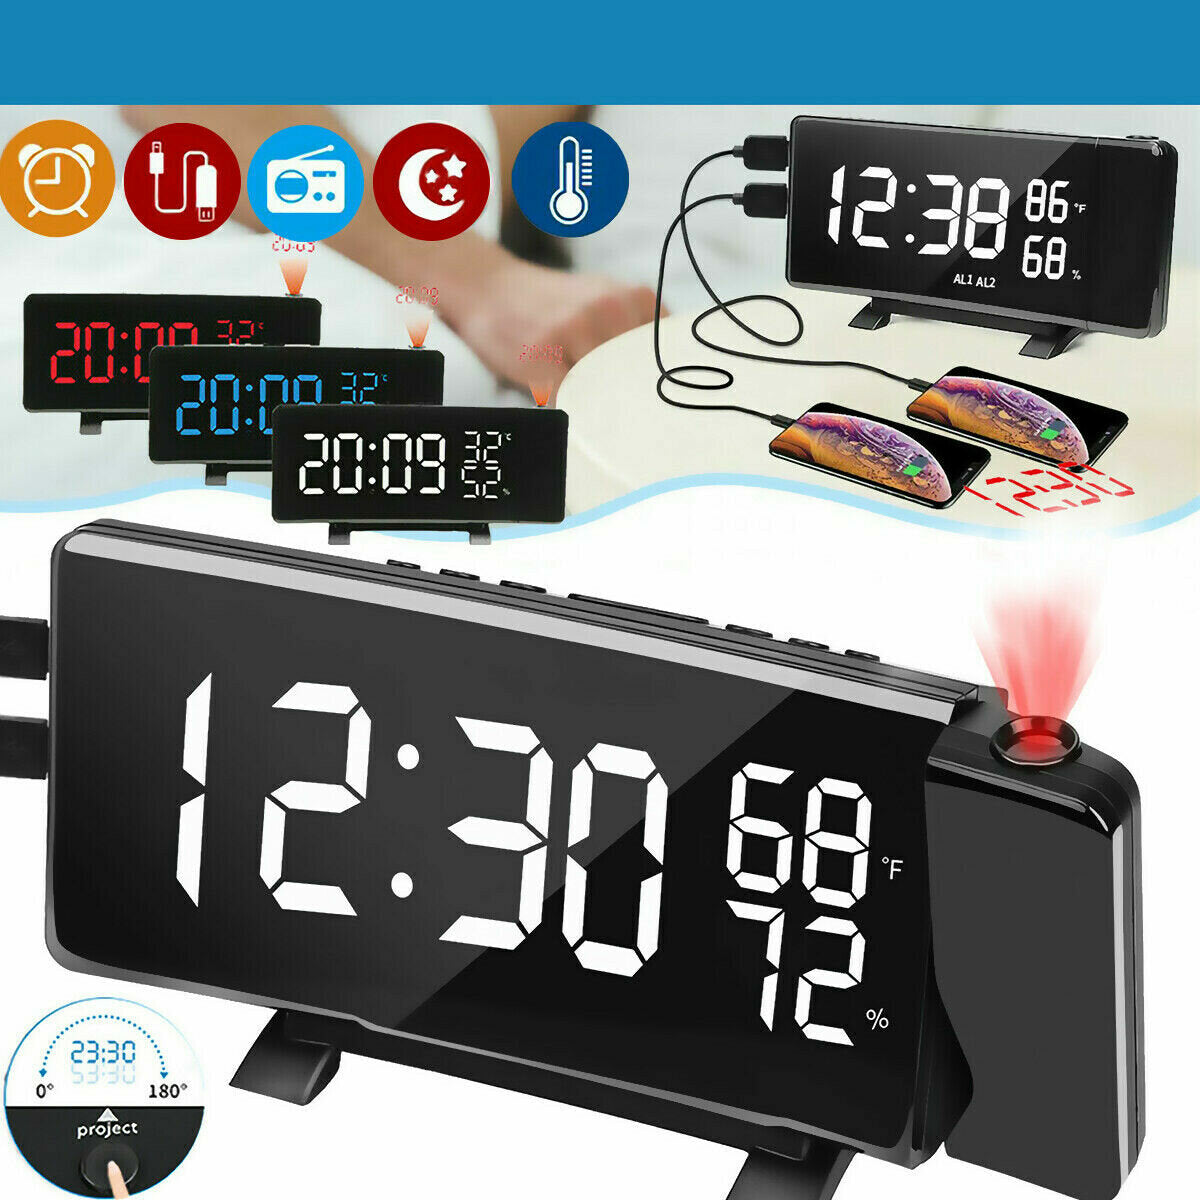 Dual USB LED Display FM Radio Alarm Clock With Time Projection Dimmable